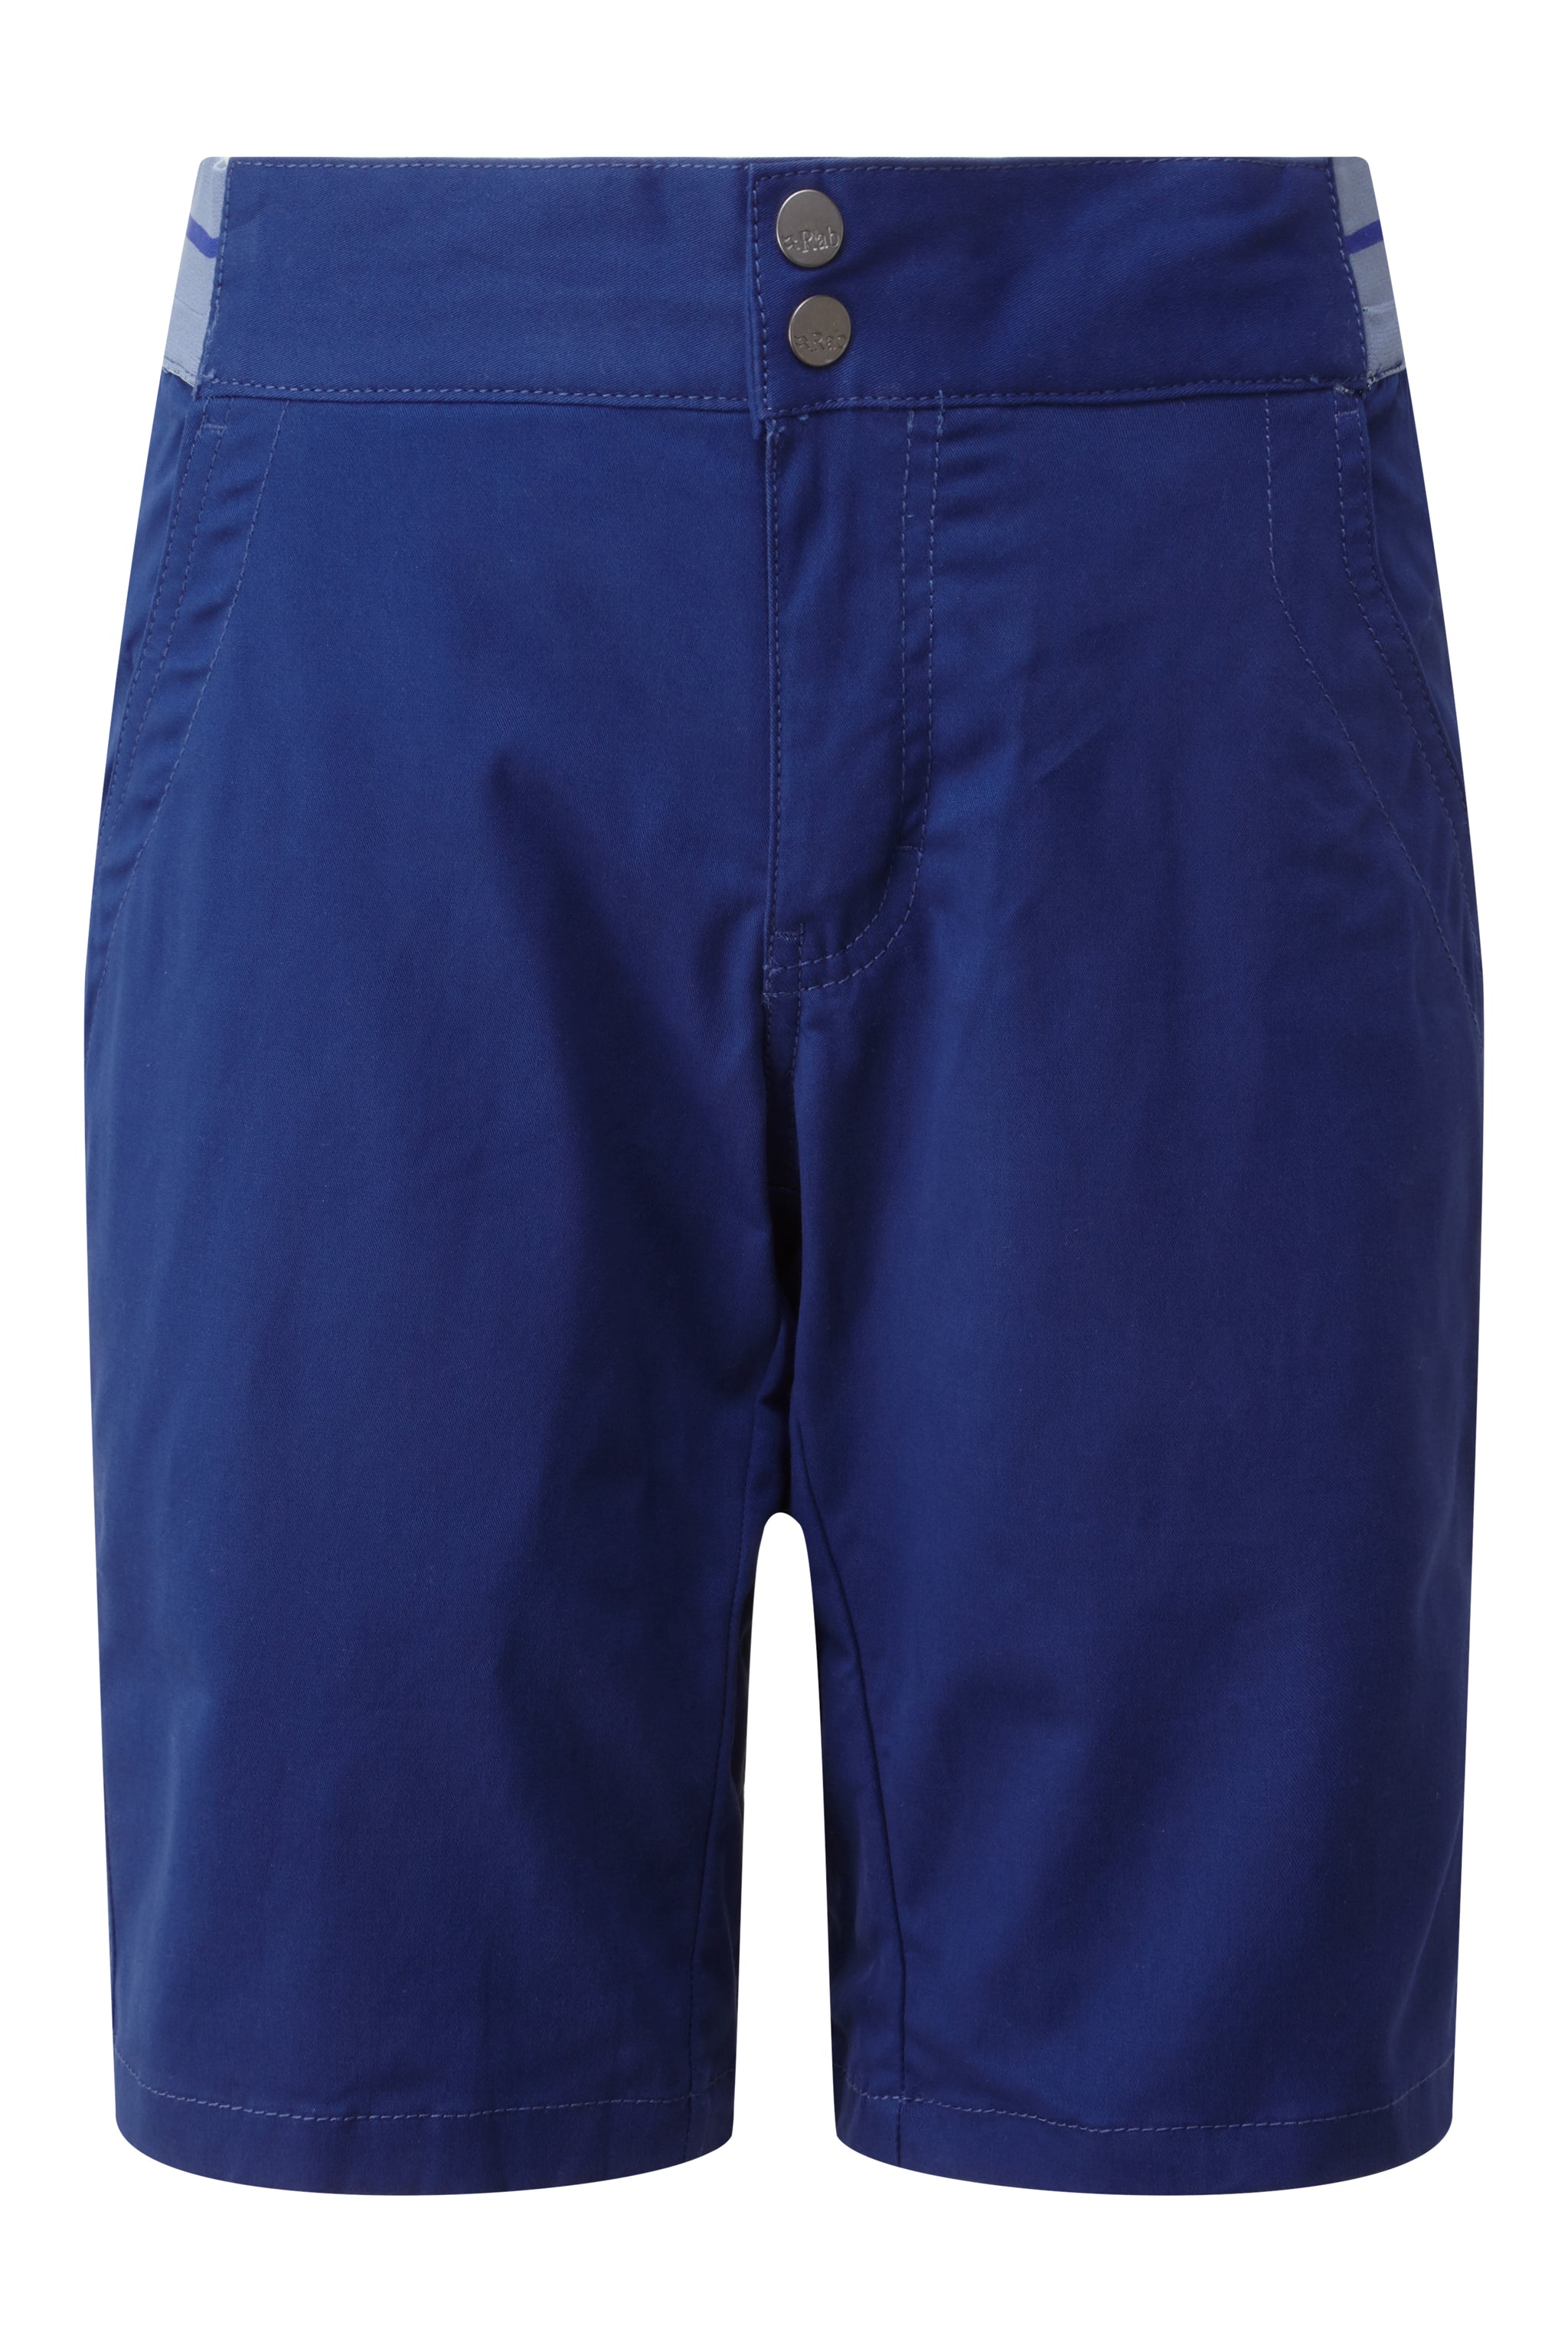 Rab Women's Zawn Shorts - Outfitters Store